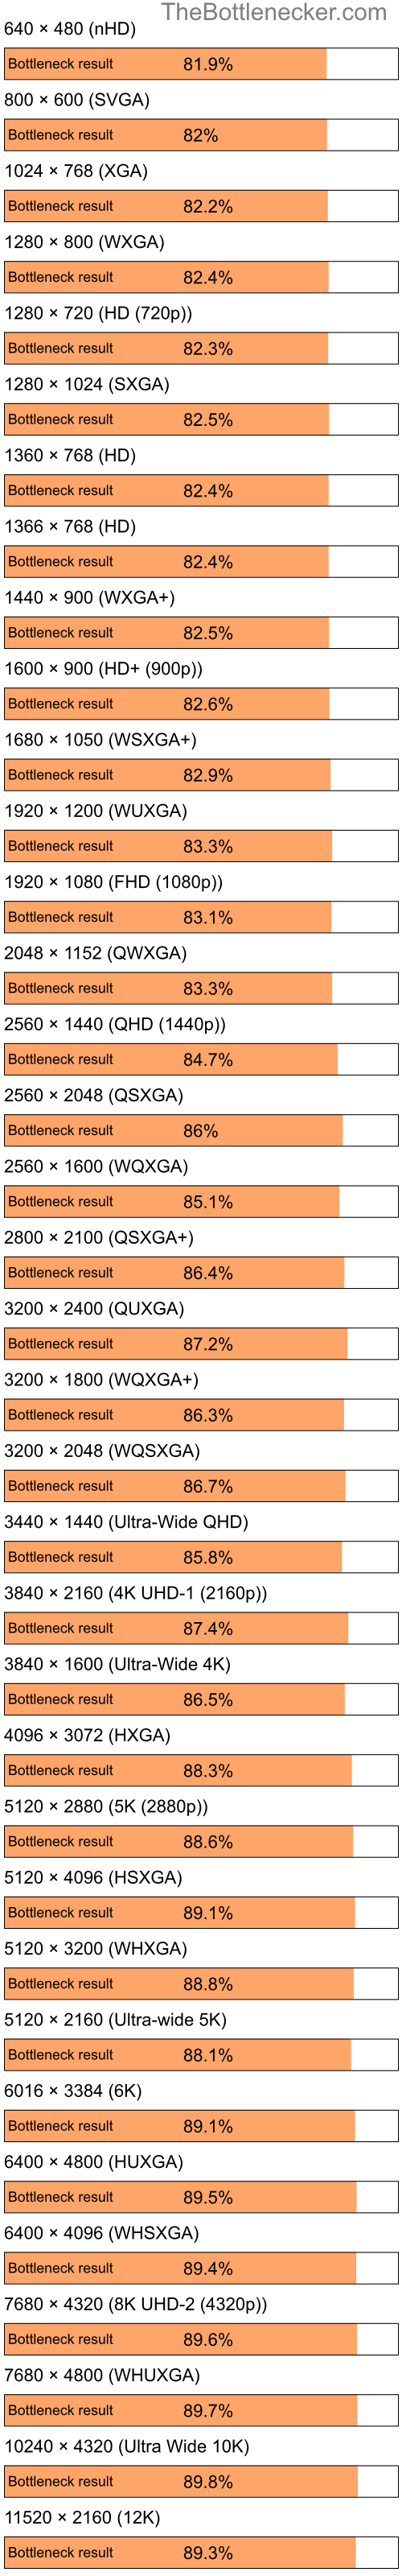 Bottleneck results by resolution for Intel Pentium 4 and NVIDIA GeForce FX 5700LE in Graphic Card Intense Tasks